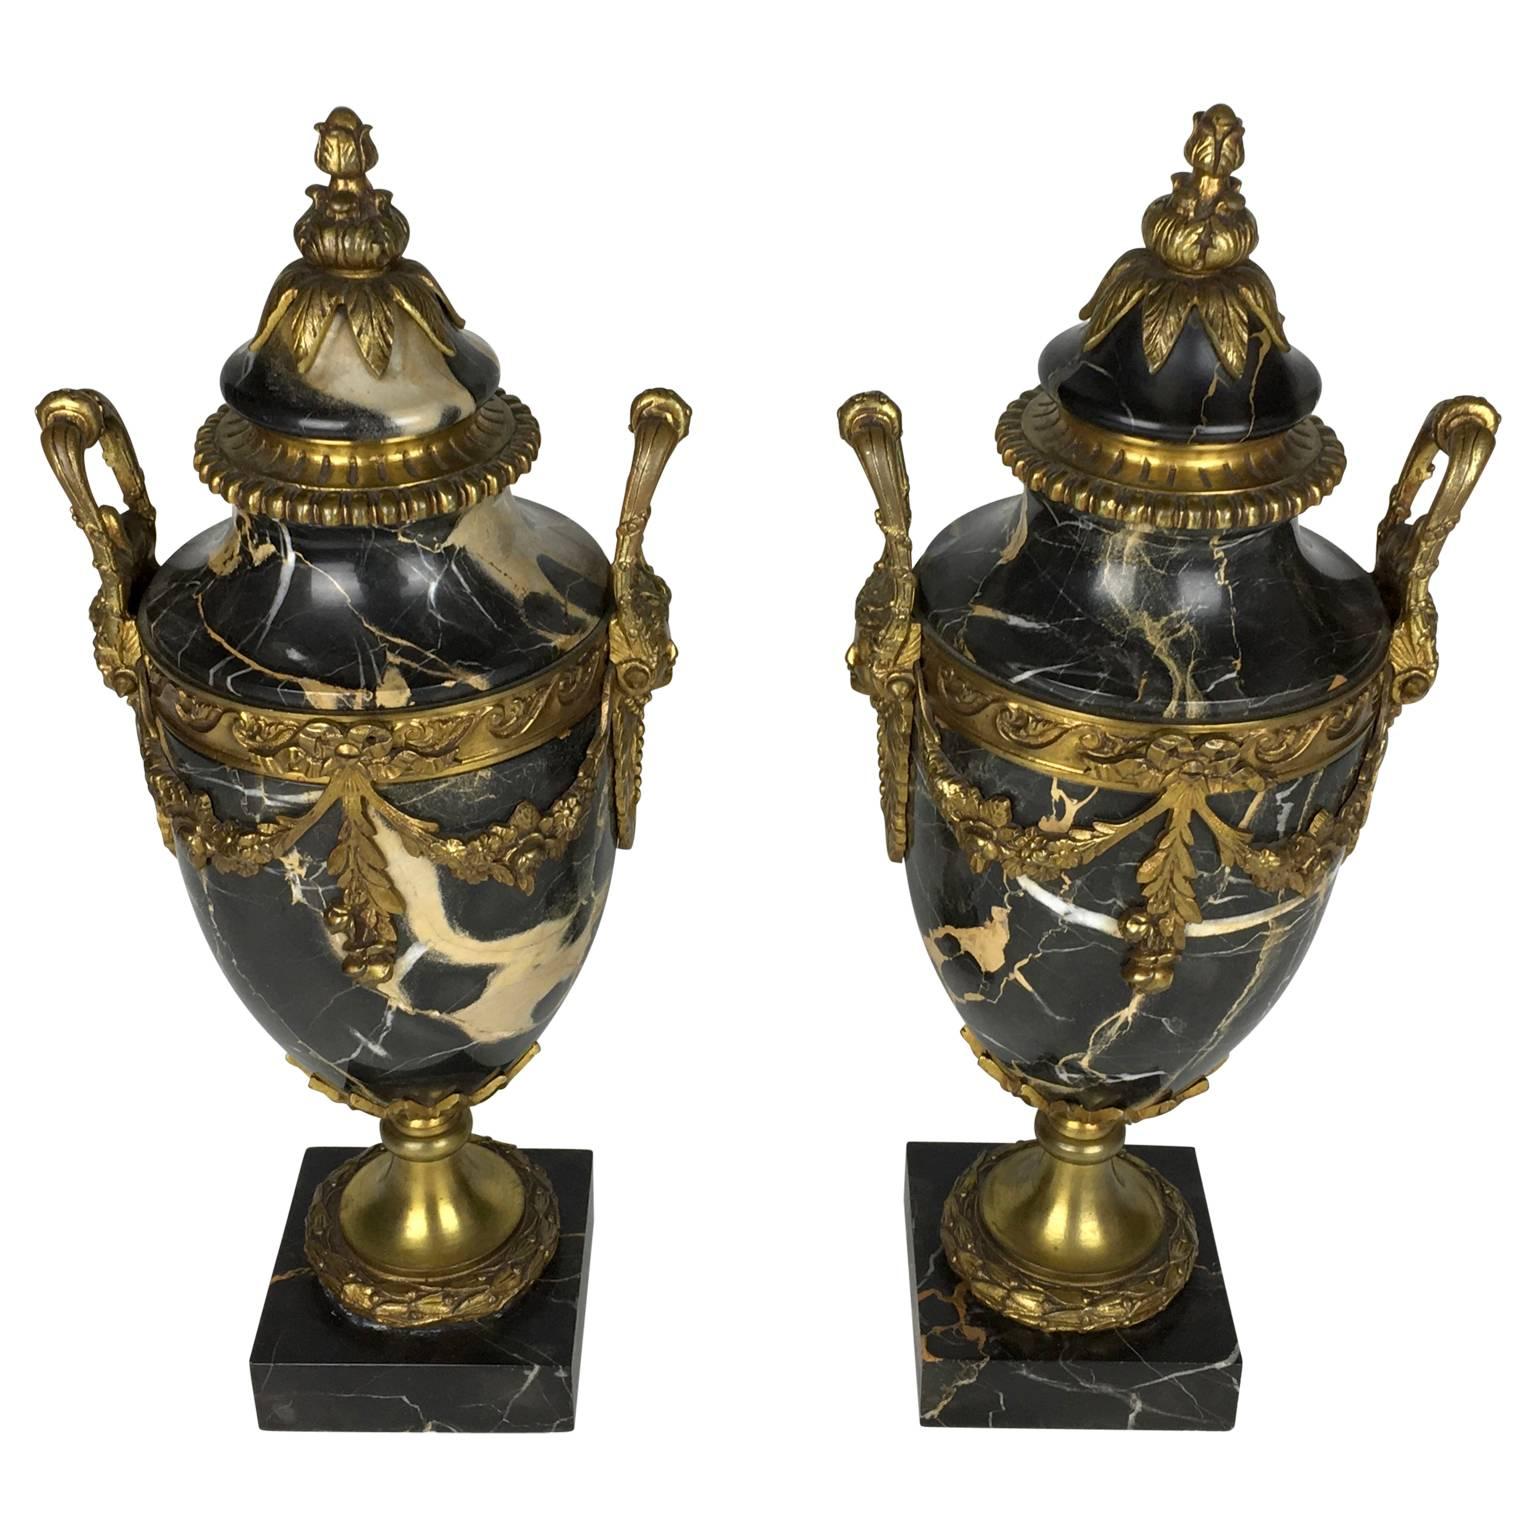 A large impressive pair of French Louis XVI style black marble urns with gilt bronze ormolu mounts. Draping floral swag. Laurel leaf design, face designed handles. Beautiful veining to the marble.